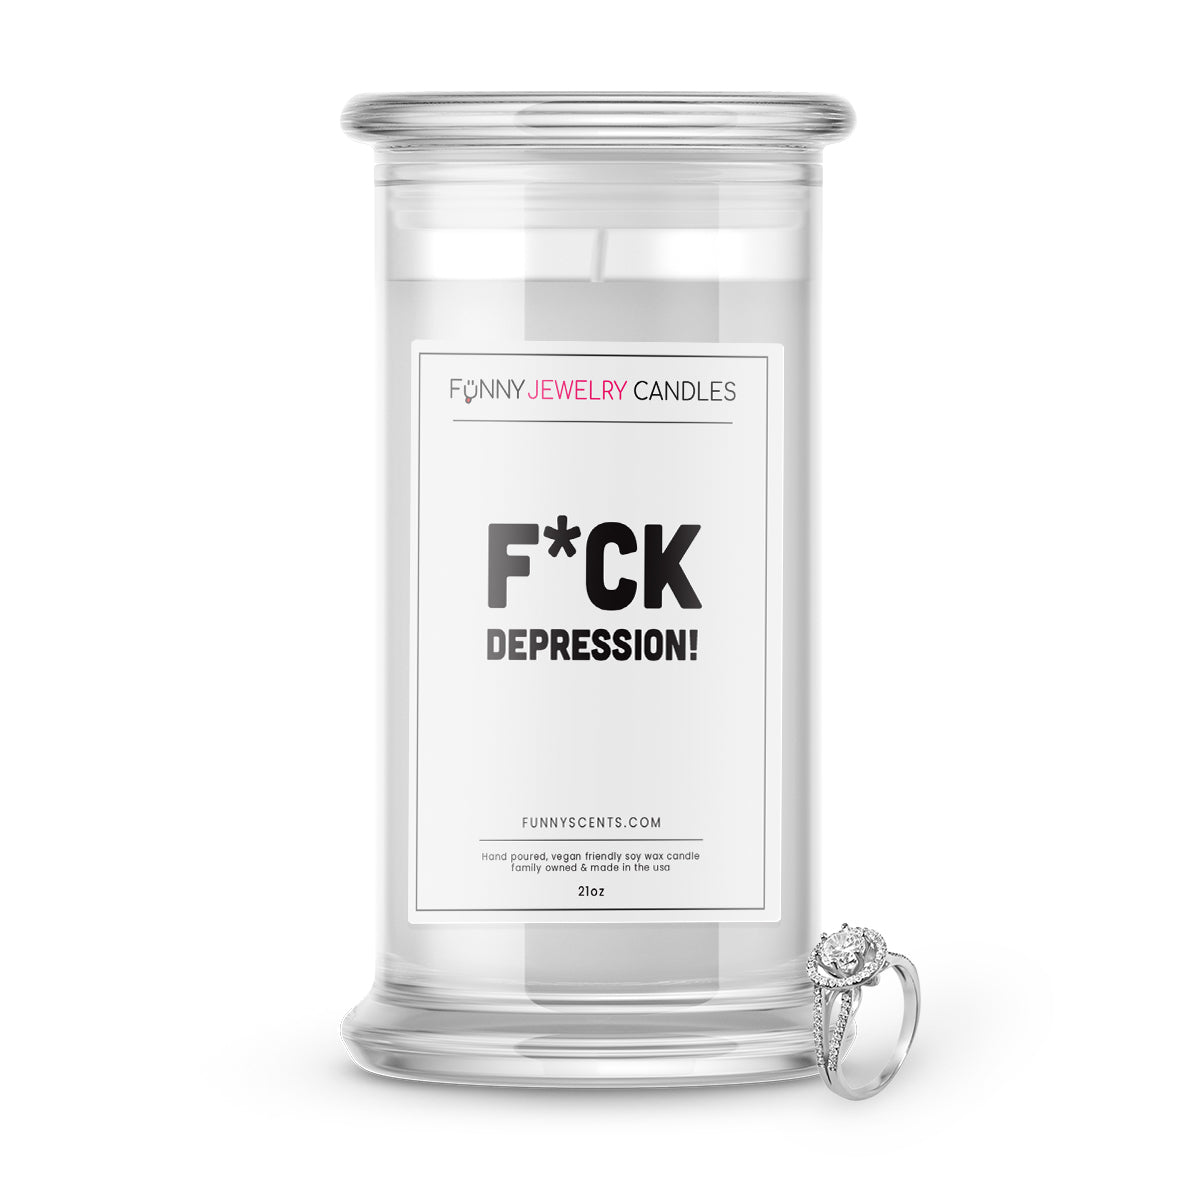 F*ck Depression! Jewelry Funny Candles